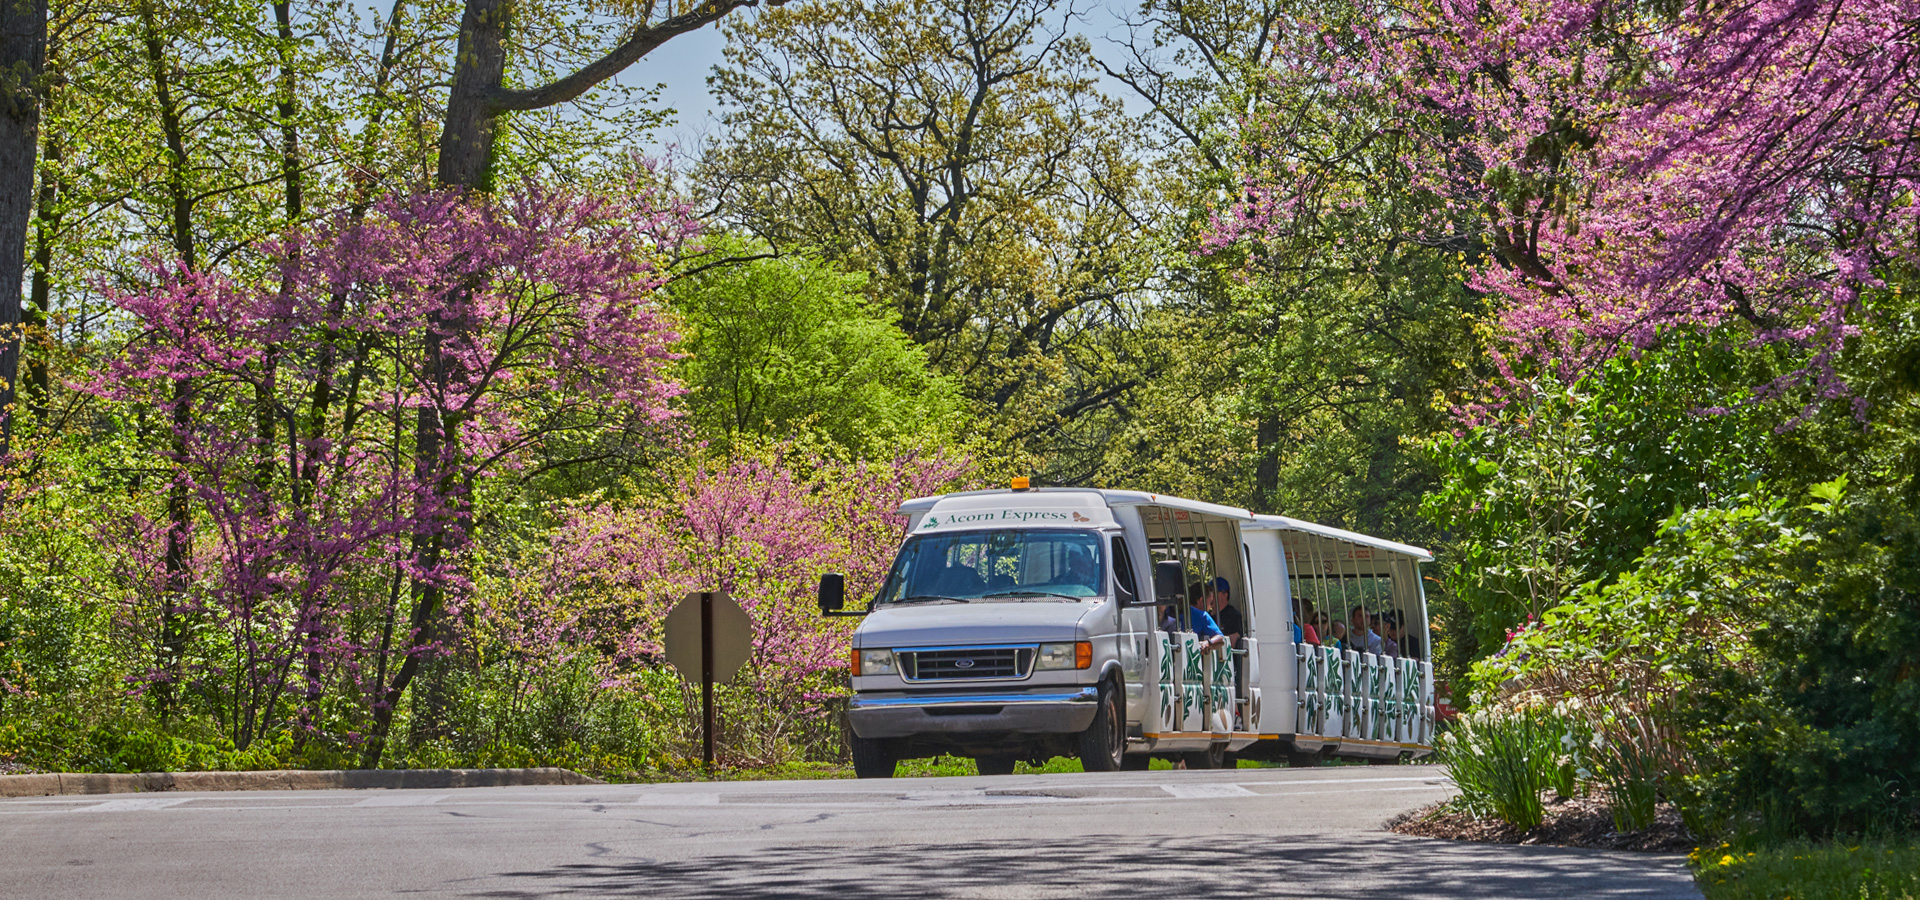 The acorn express tram drives under the blooming red buds in early spring